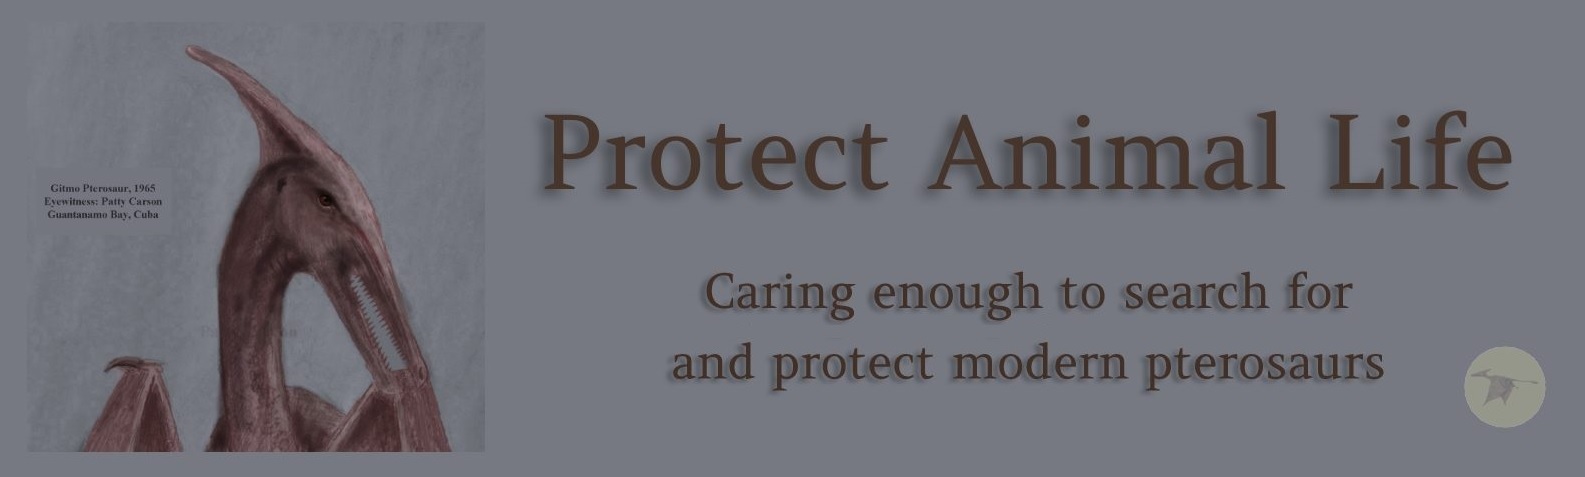 Protect Animal Life banner for this Youtube channel